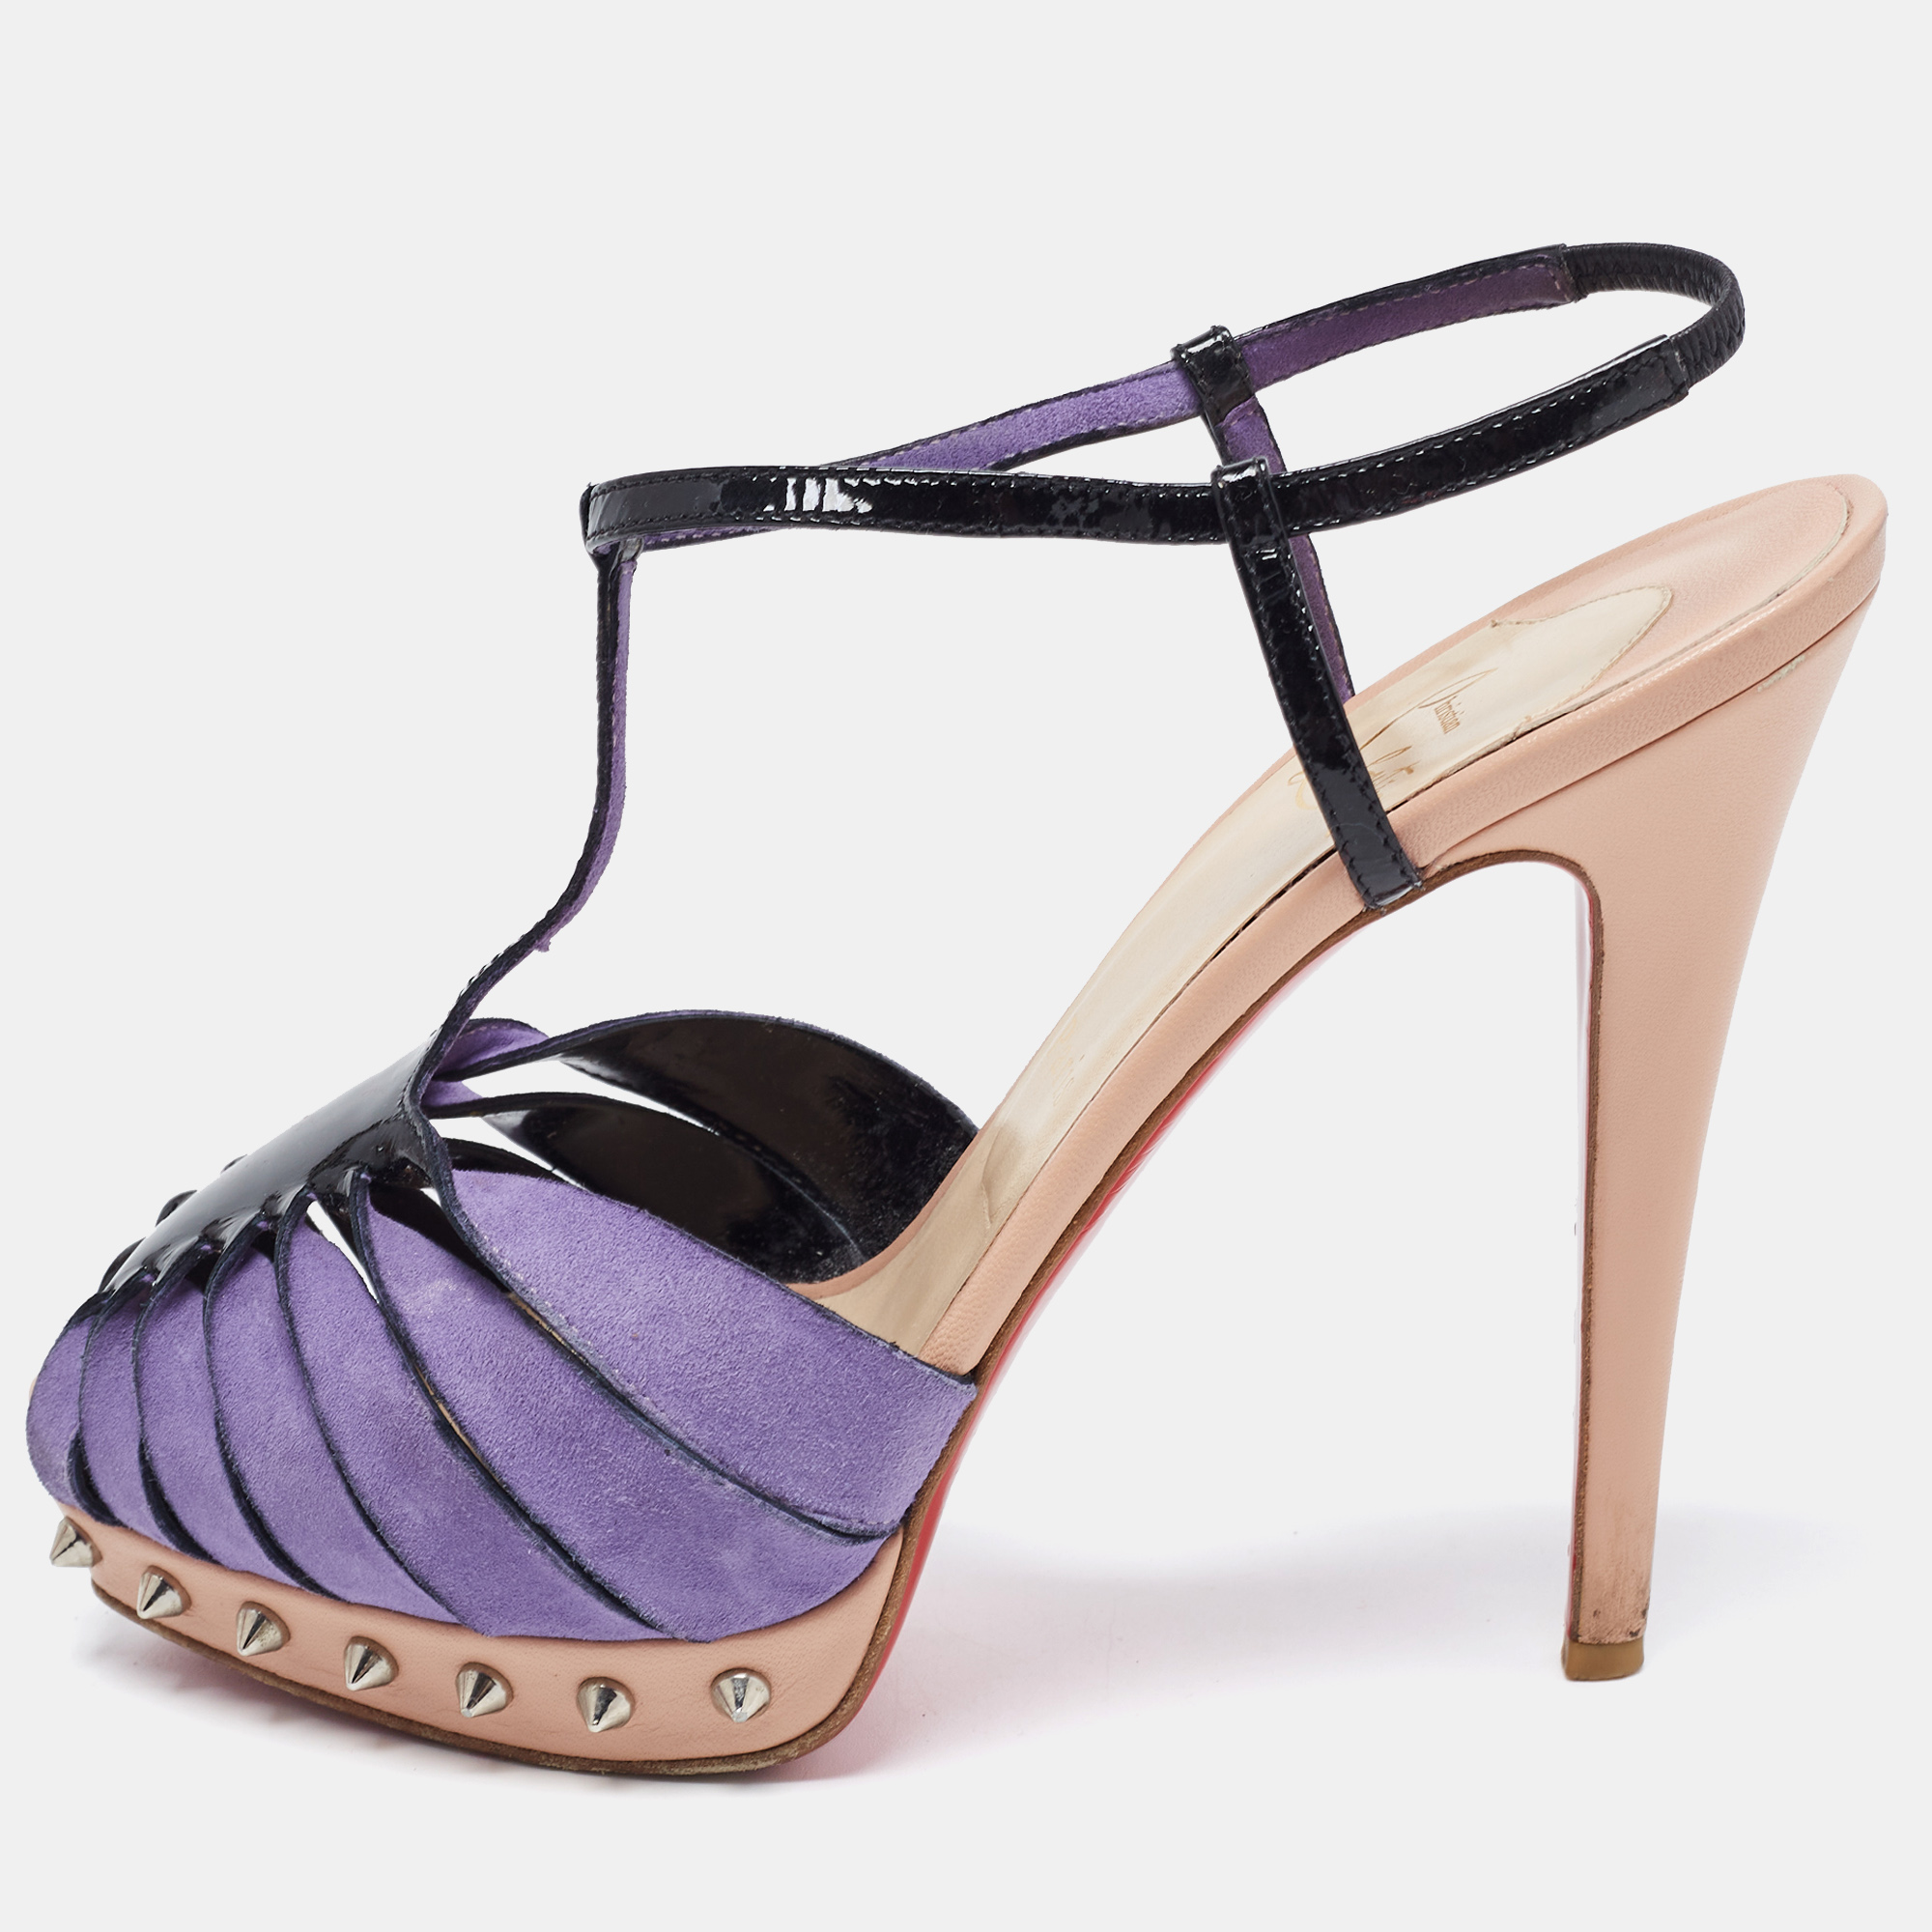 Christian louboutin purple/black suede and patent leather zigounette spiked slingback sandals size 38.5